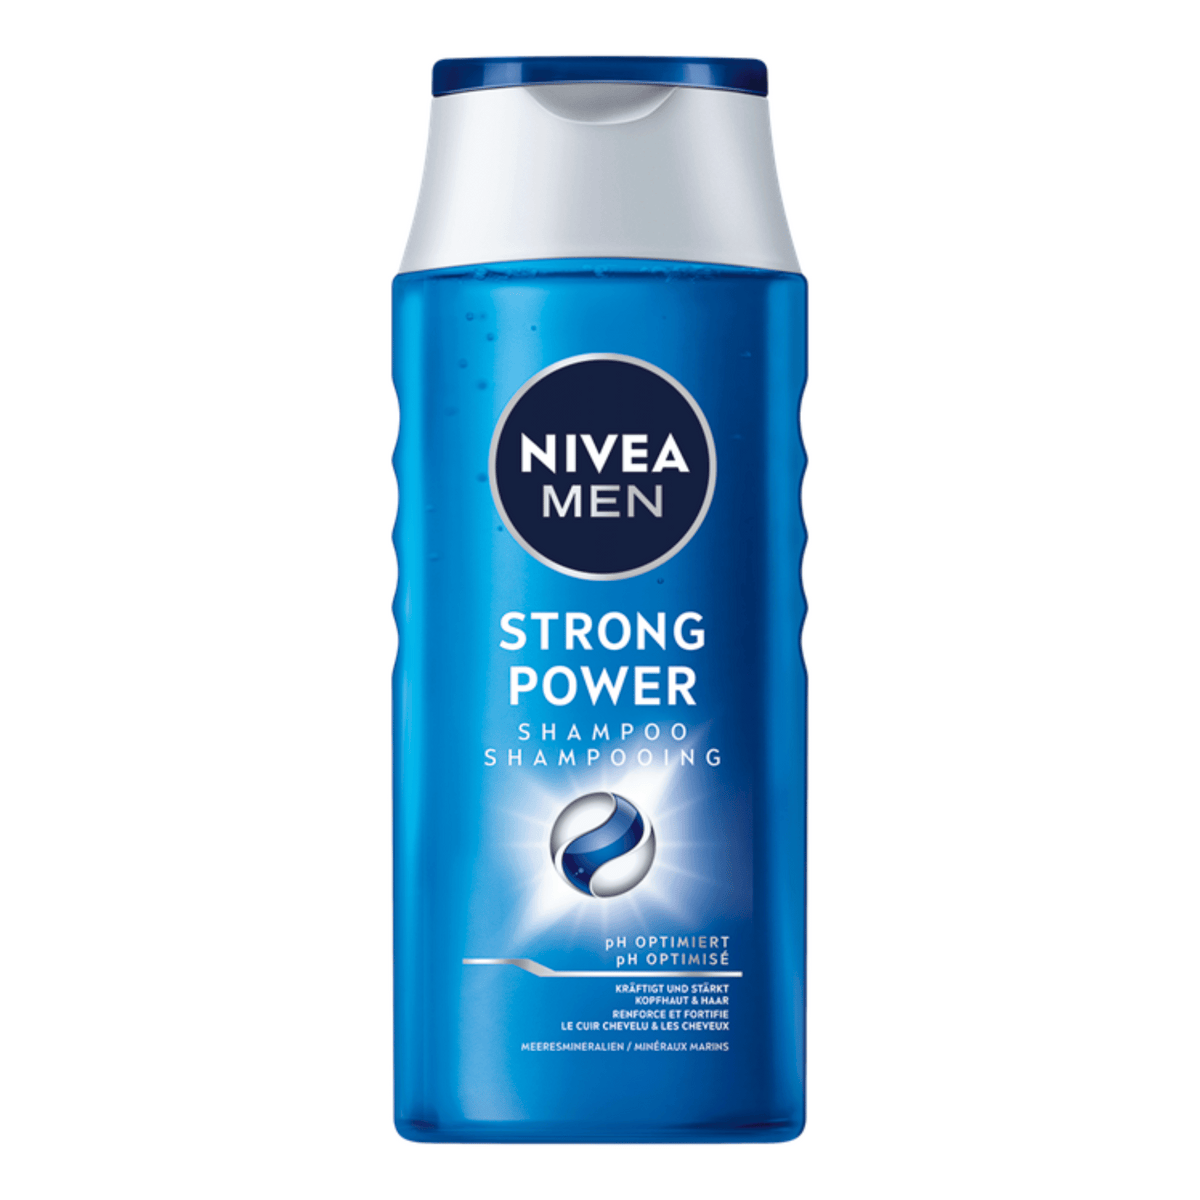 Primary Image of Shampoo for men - Strong Power